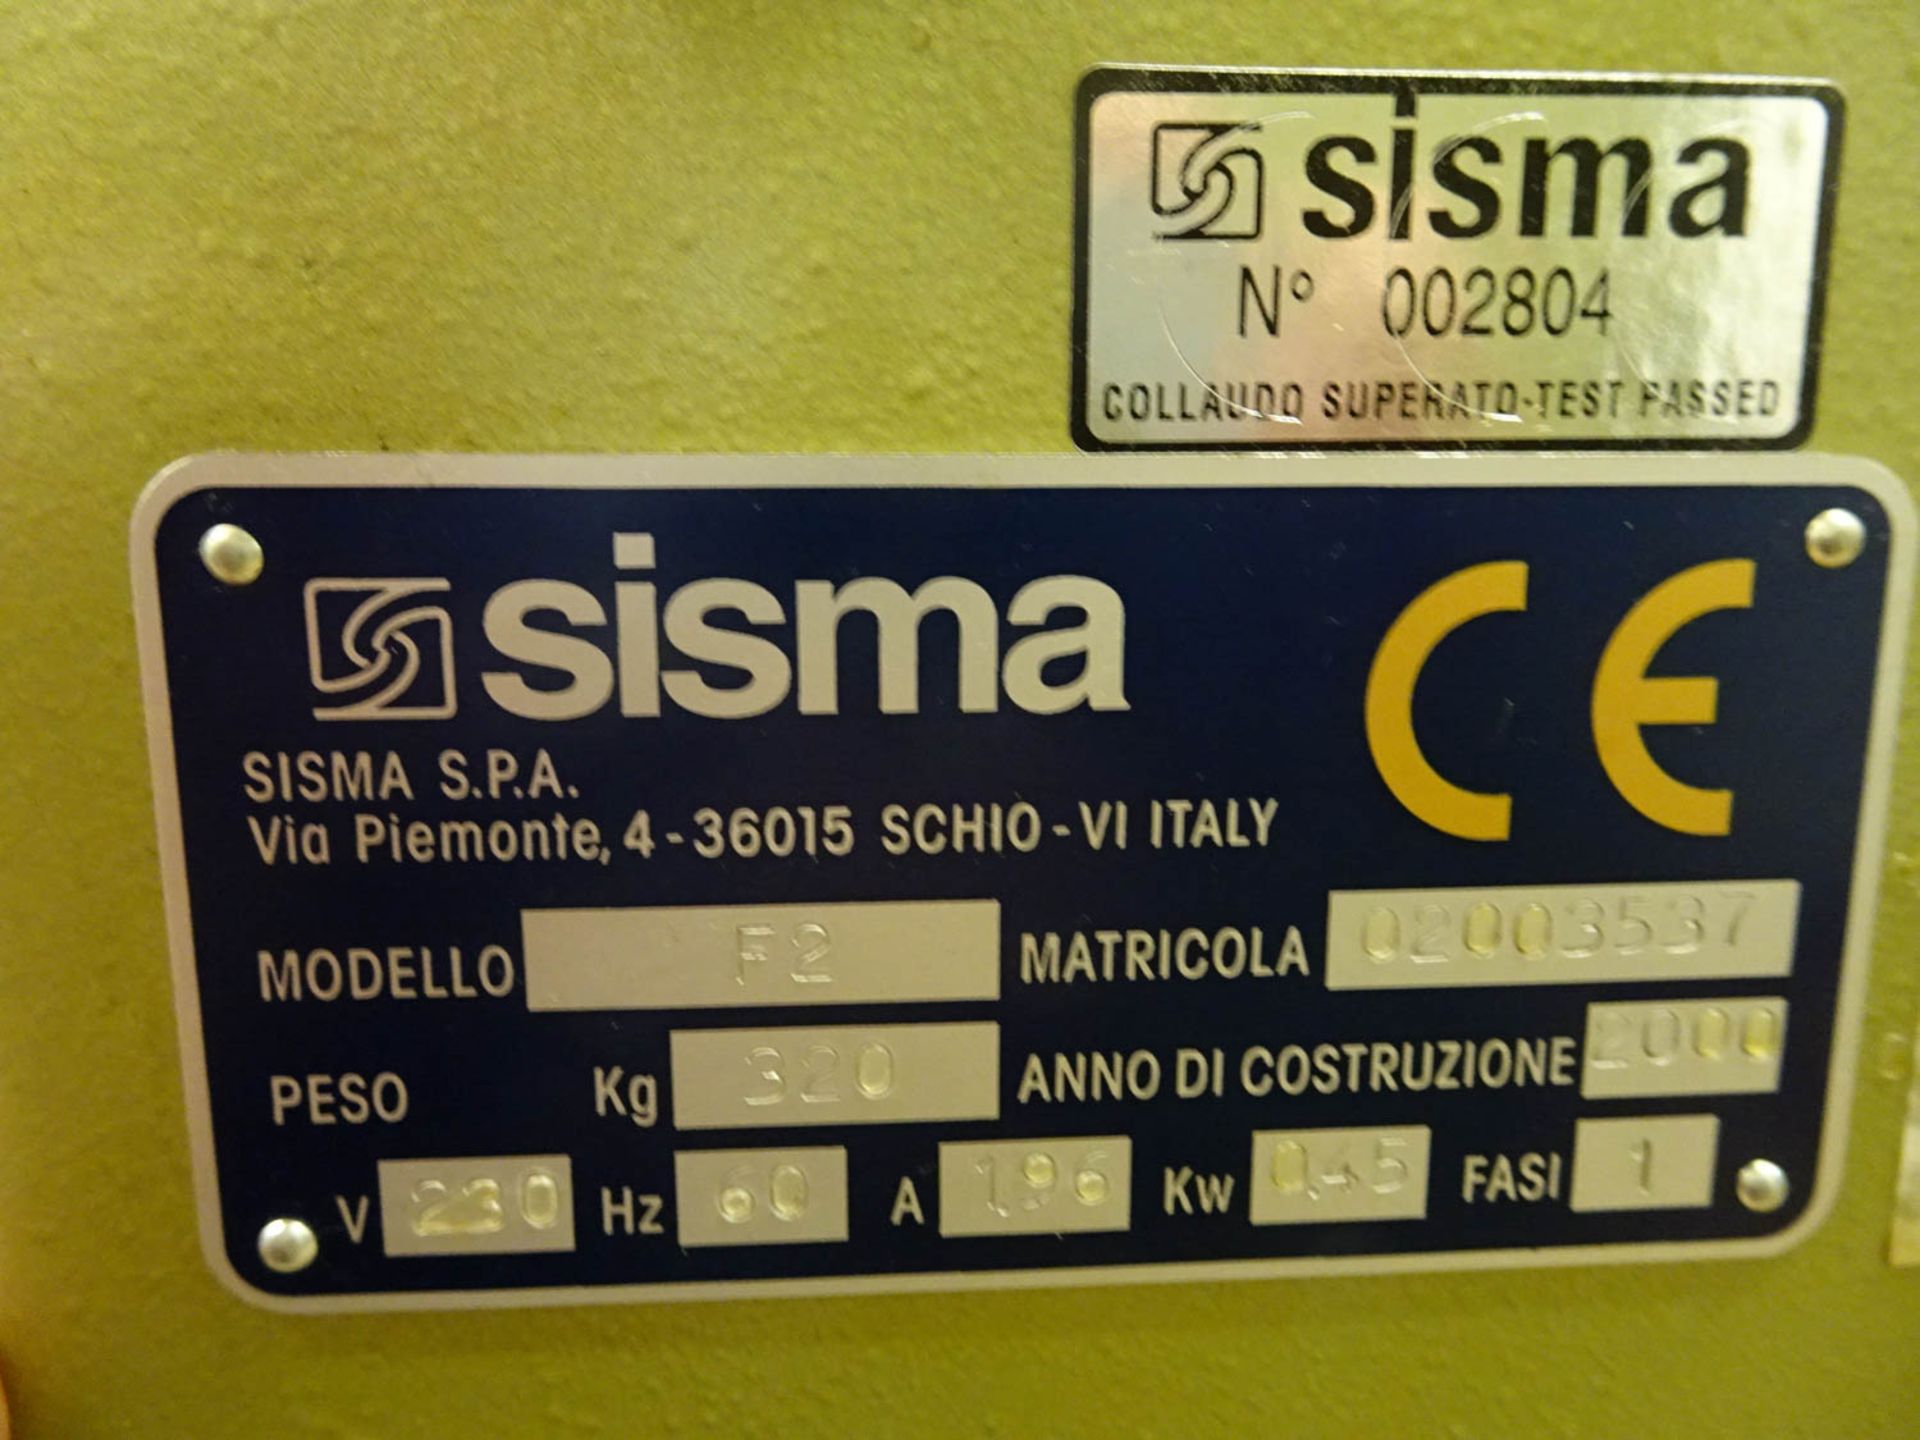 SISMA MDL. F2 (ITALY) (CE) CHAIN MAKING MACHINE, HIGH SPEED FIGARO LONG & SHORT, CURB & CABLE, 0. - Image 7 of 7